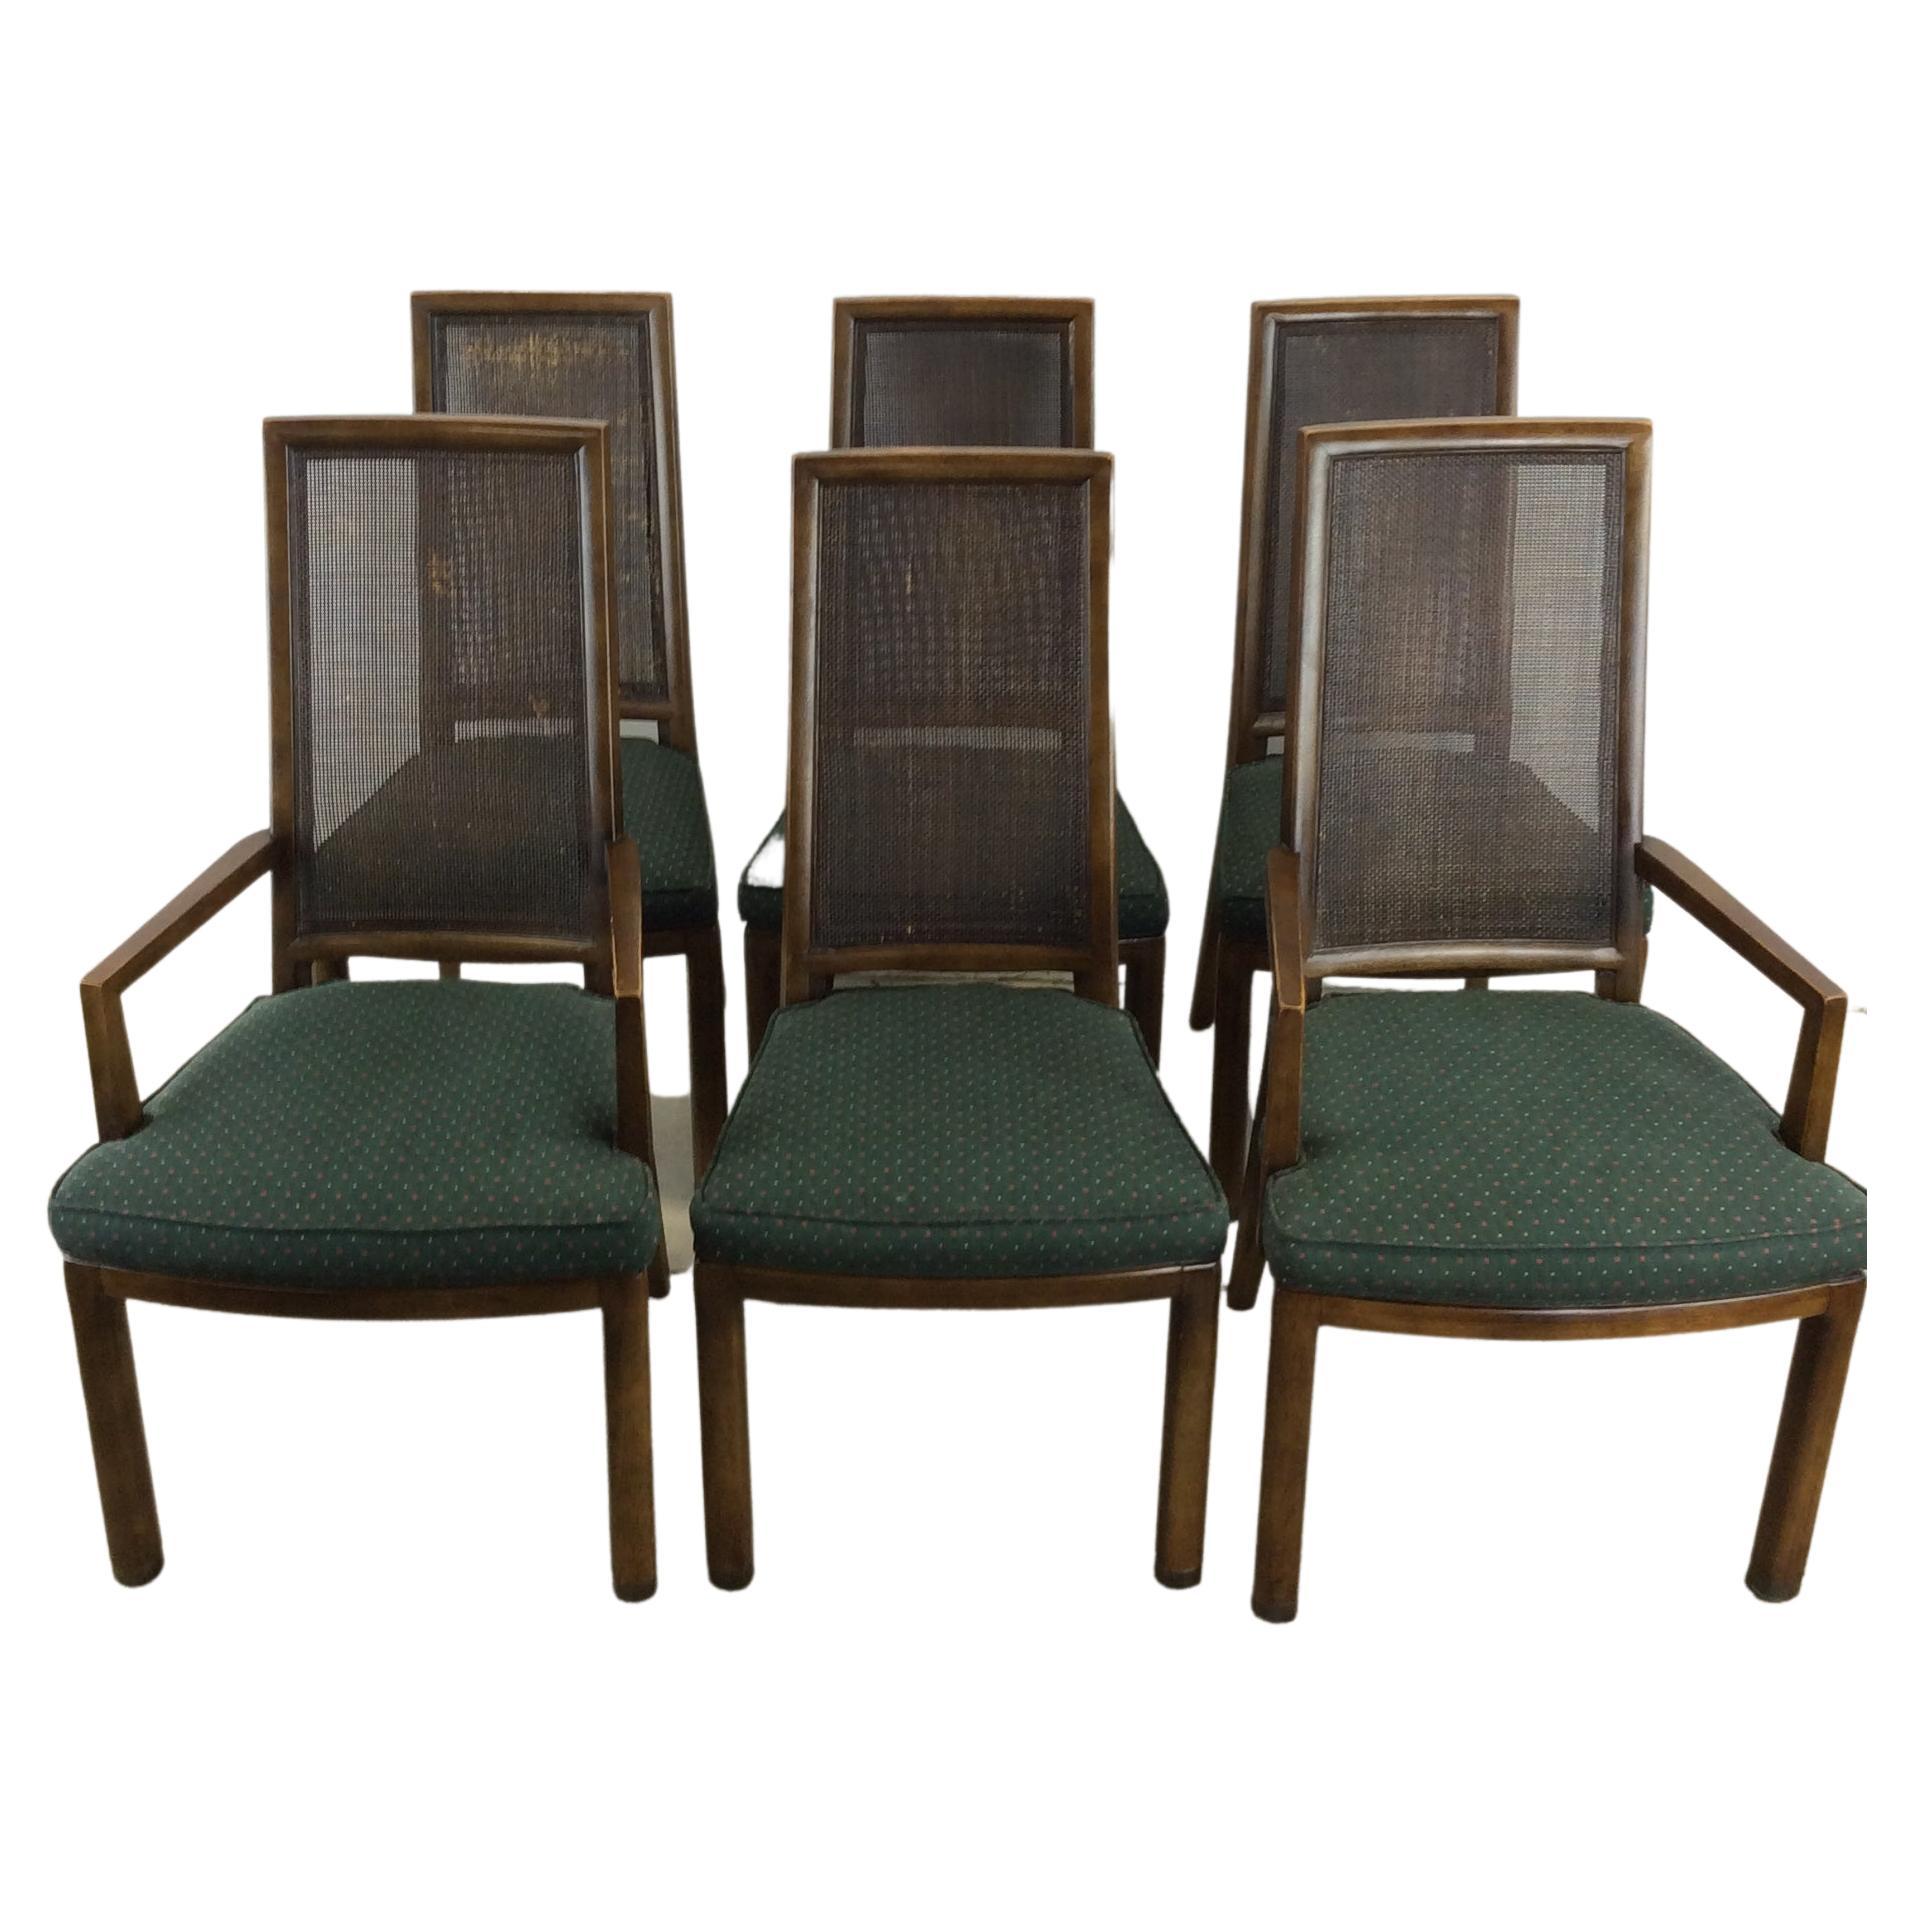 Set of 6 Midcentury Cane-Back Dining Chairs by Henredon  For Sale